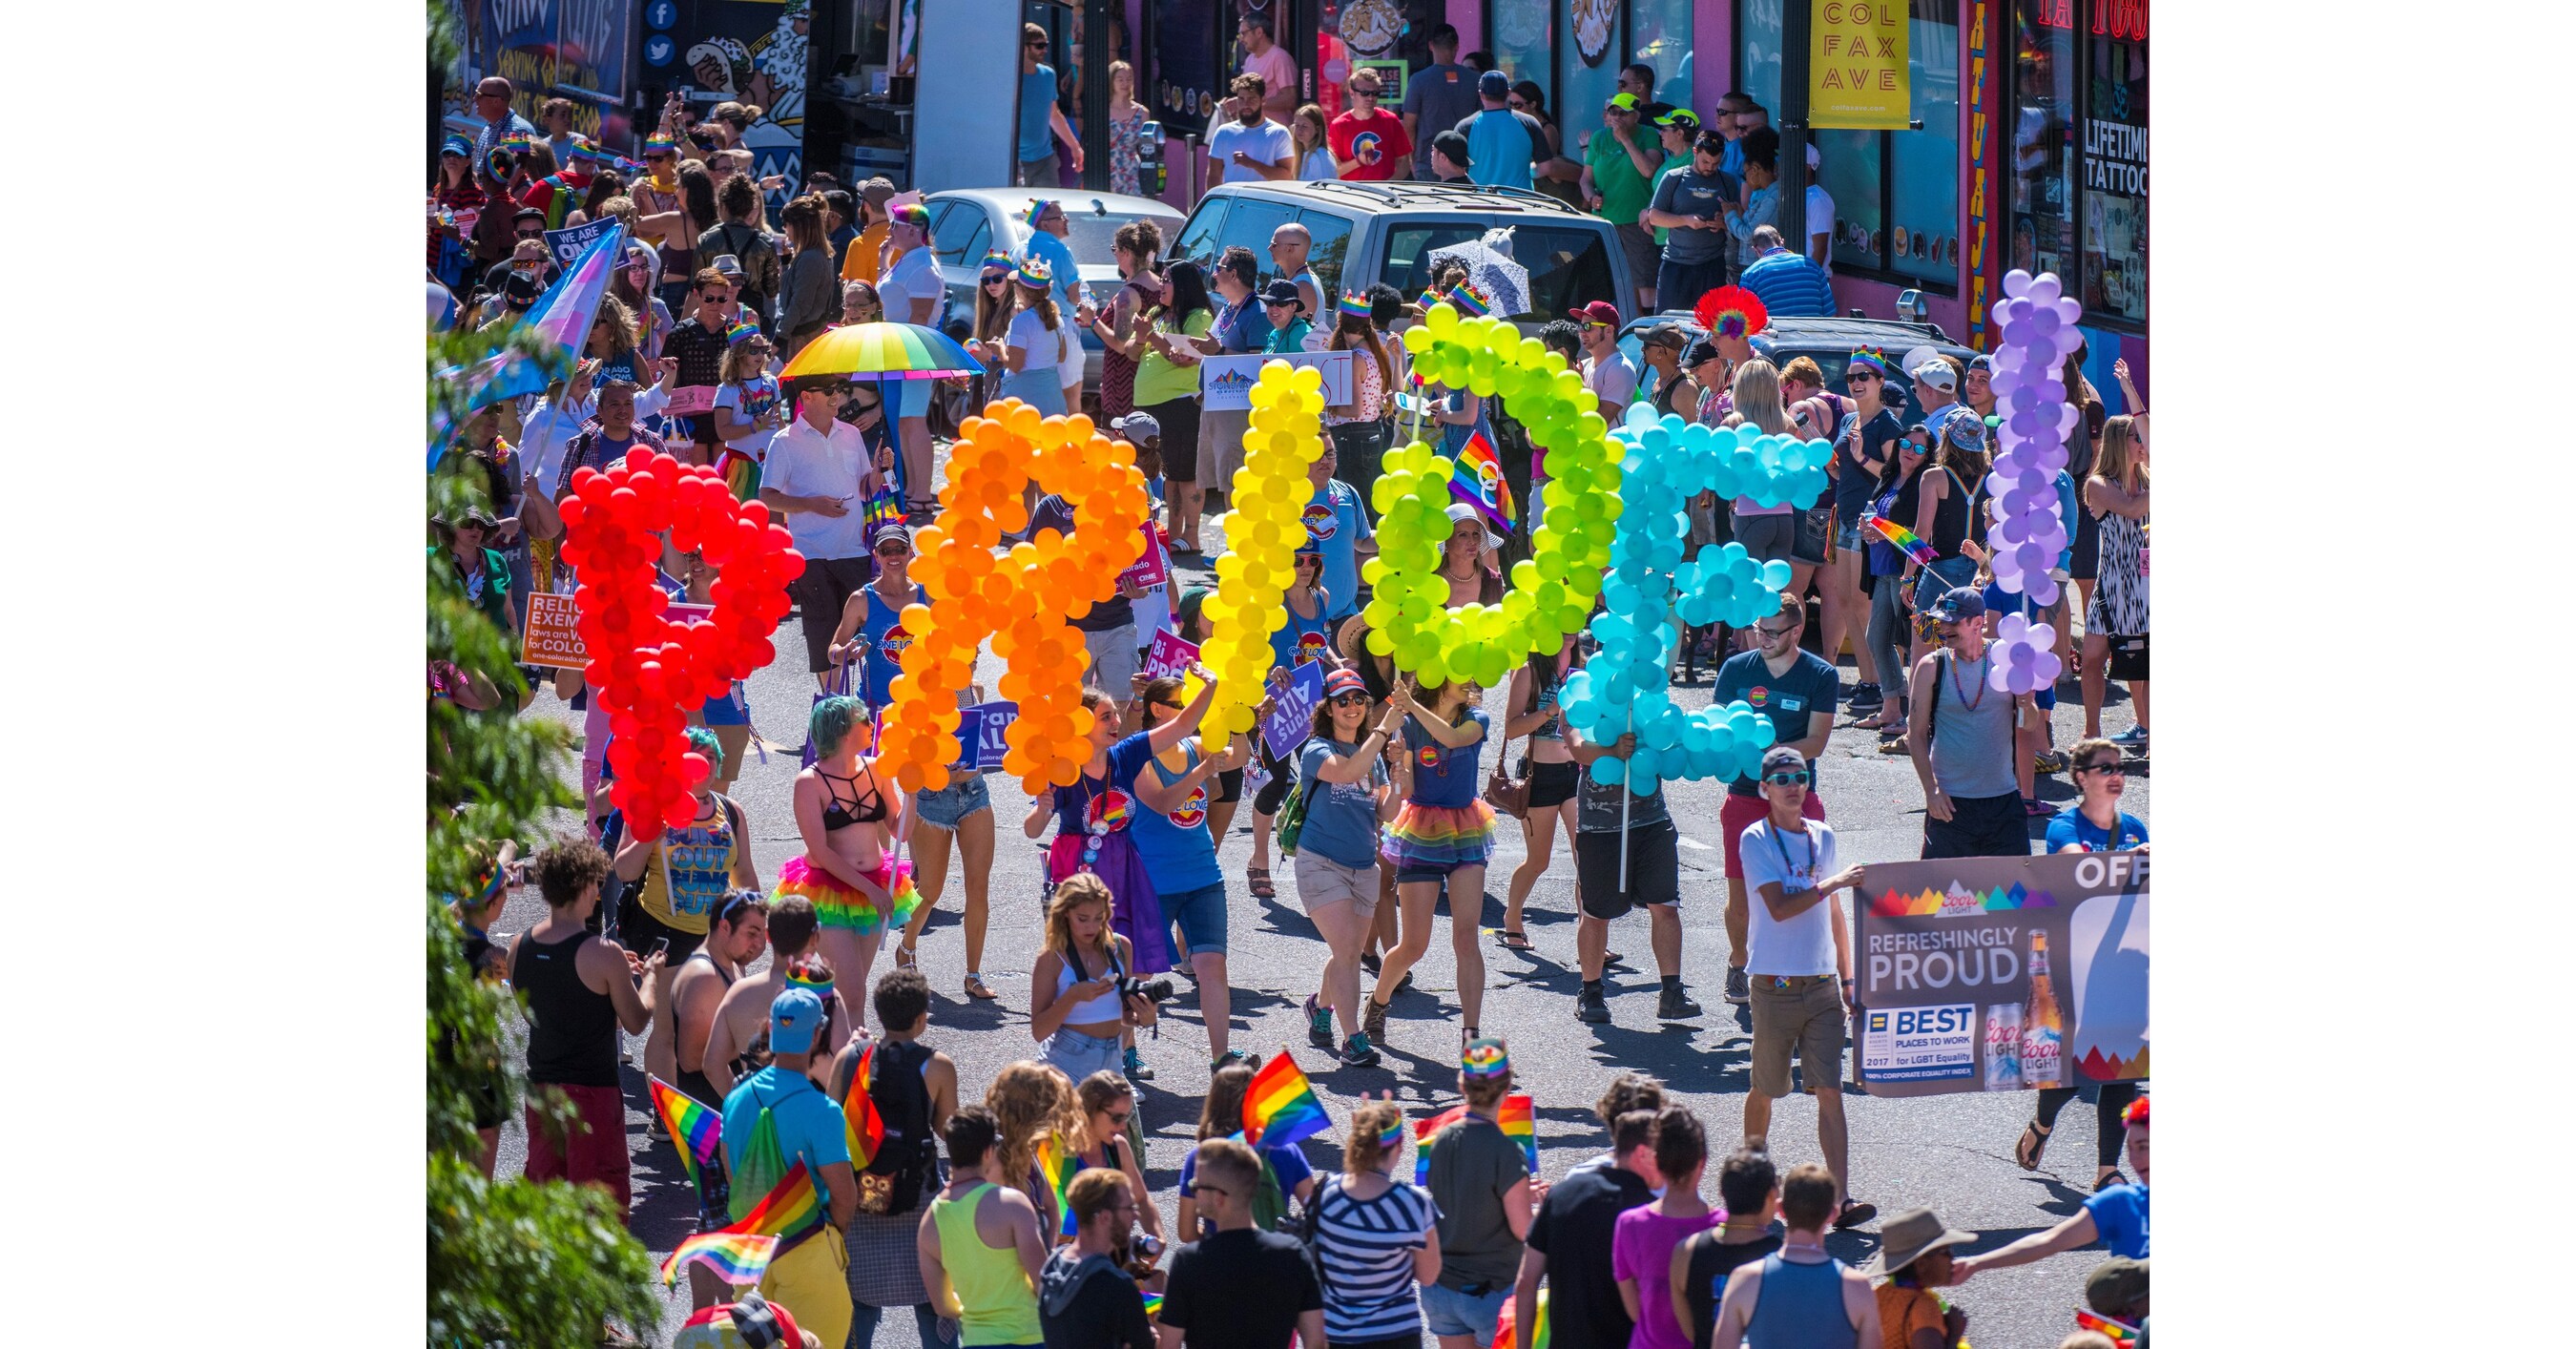 Over 500,000 Expected for Denver PrideFest The Largest LGBTQ+ Event in